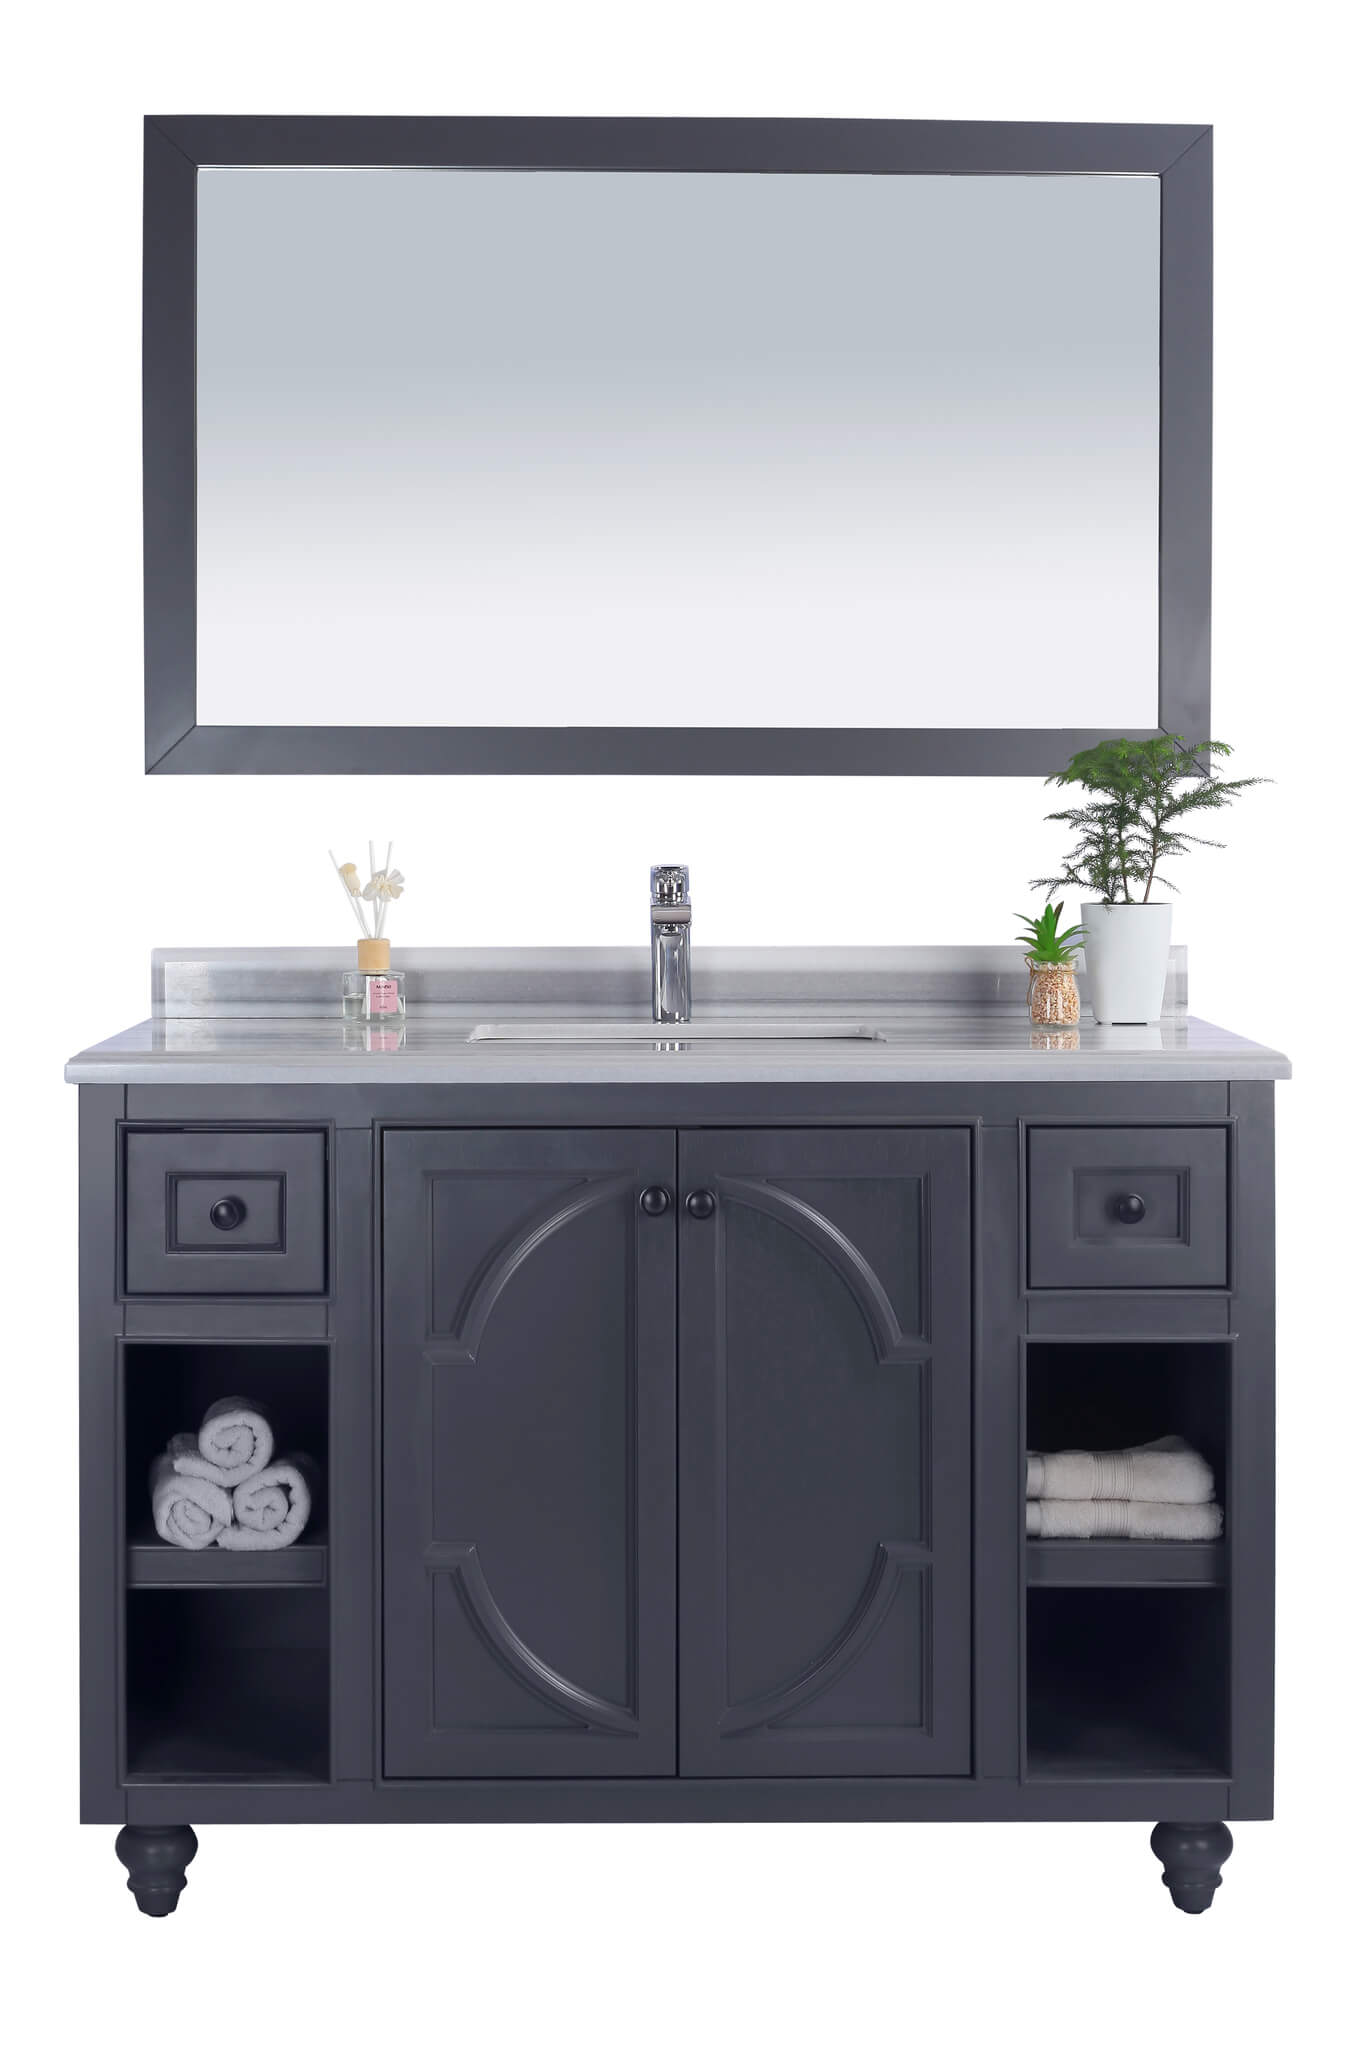 LAVIVA Odyssey 313613-48G-WS 48" Single Bathroom Vanity in Maple Grey with White Stripes Marble, White Rectangle Sink, Front View